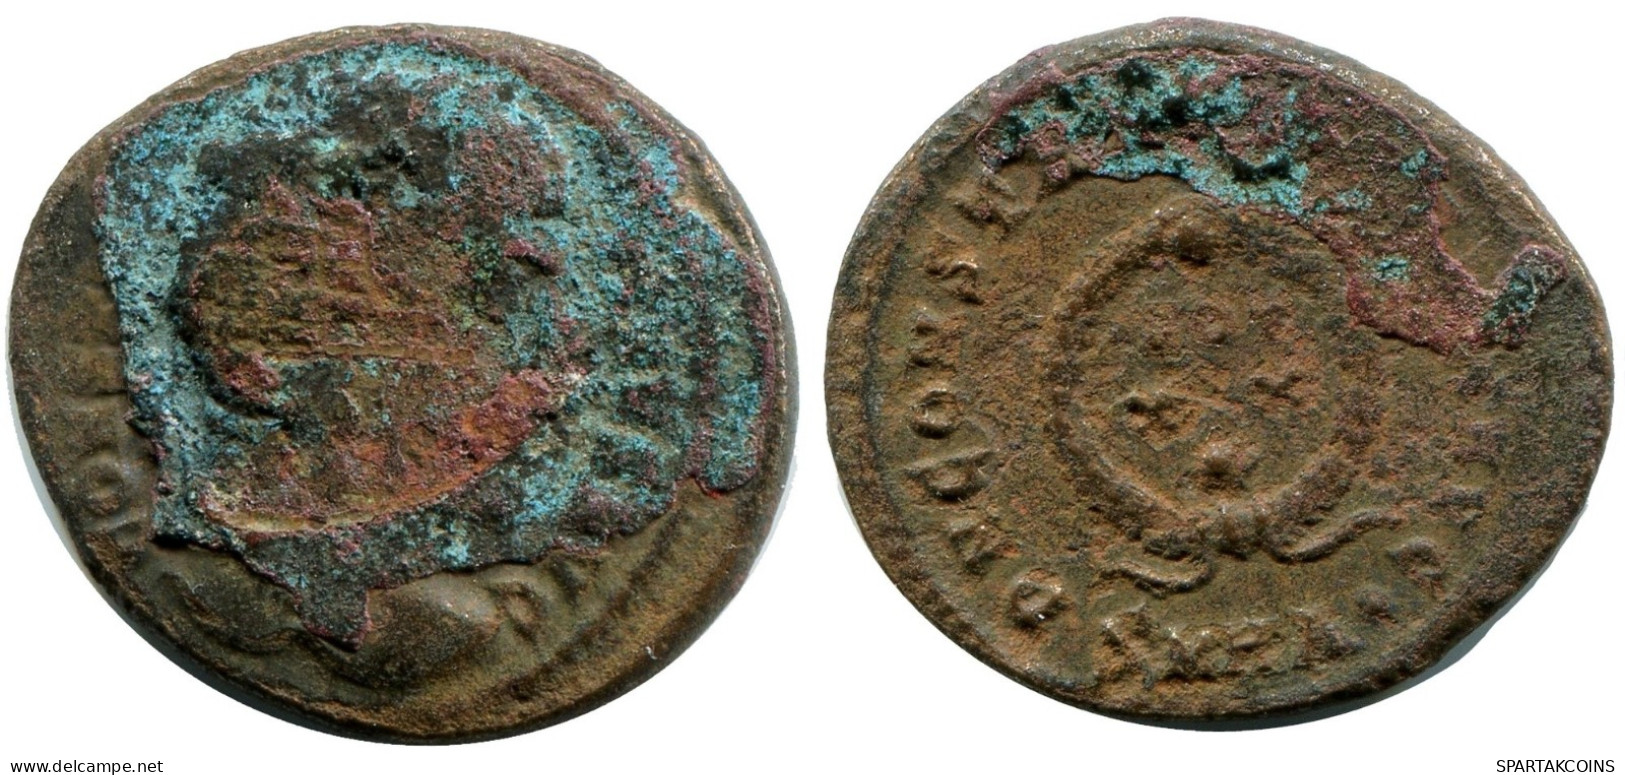 CONSTANTINE I MINTED IN HERACLEA FROM THE ROYAL ONTARIO MUSEUM #ANC11202.14.U.A - The Christian Empire (307 AD To 363 AD)